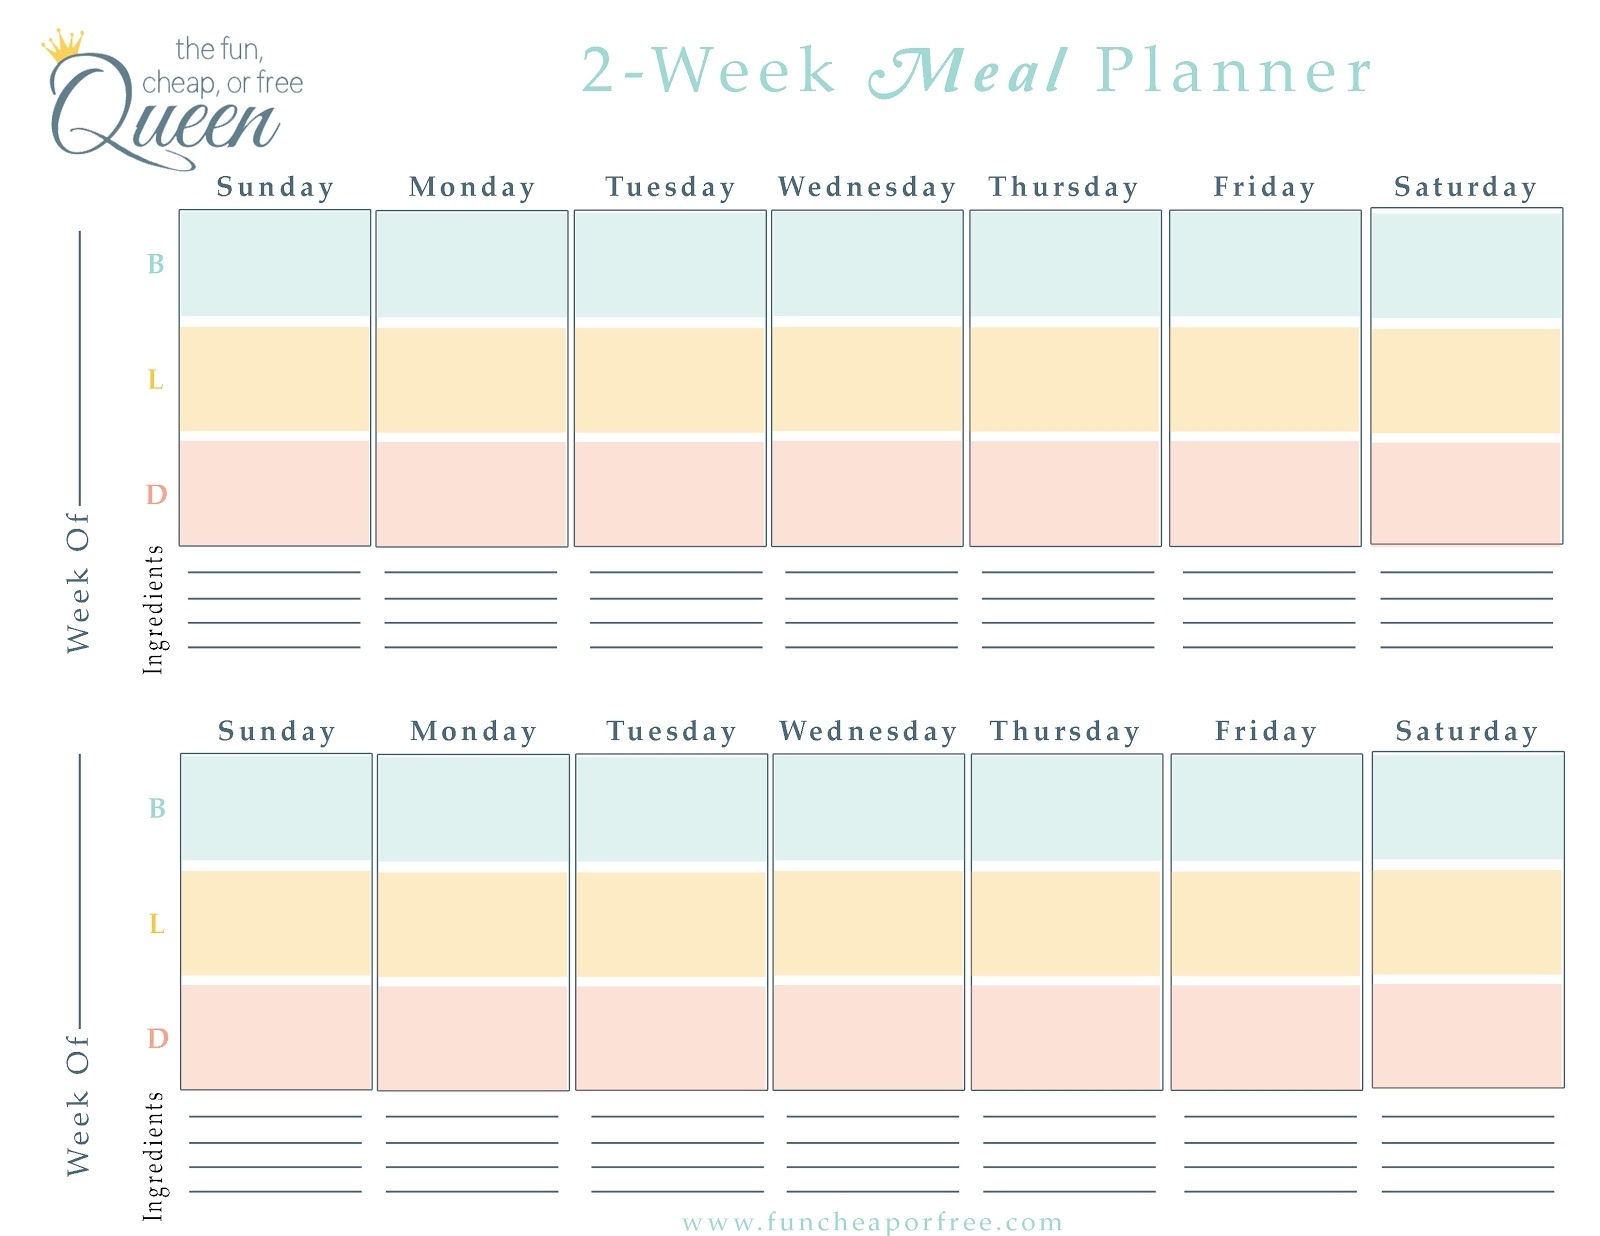 Easy Meal Plan Structure With Free Printables! - Fun Cheap Or Free intended for Calendar Weekly Menu Print Outs